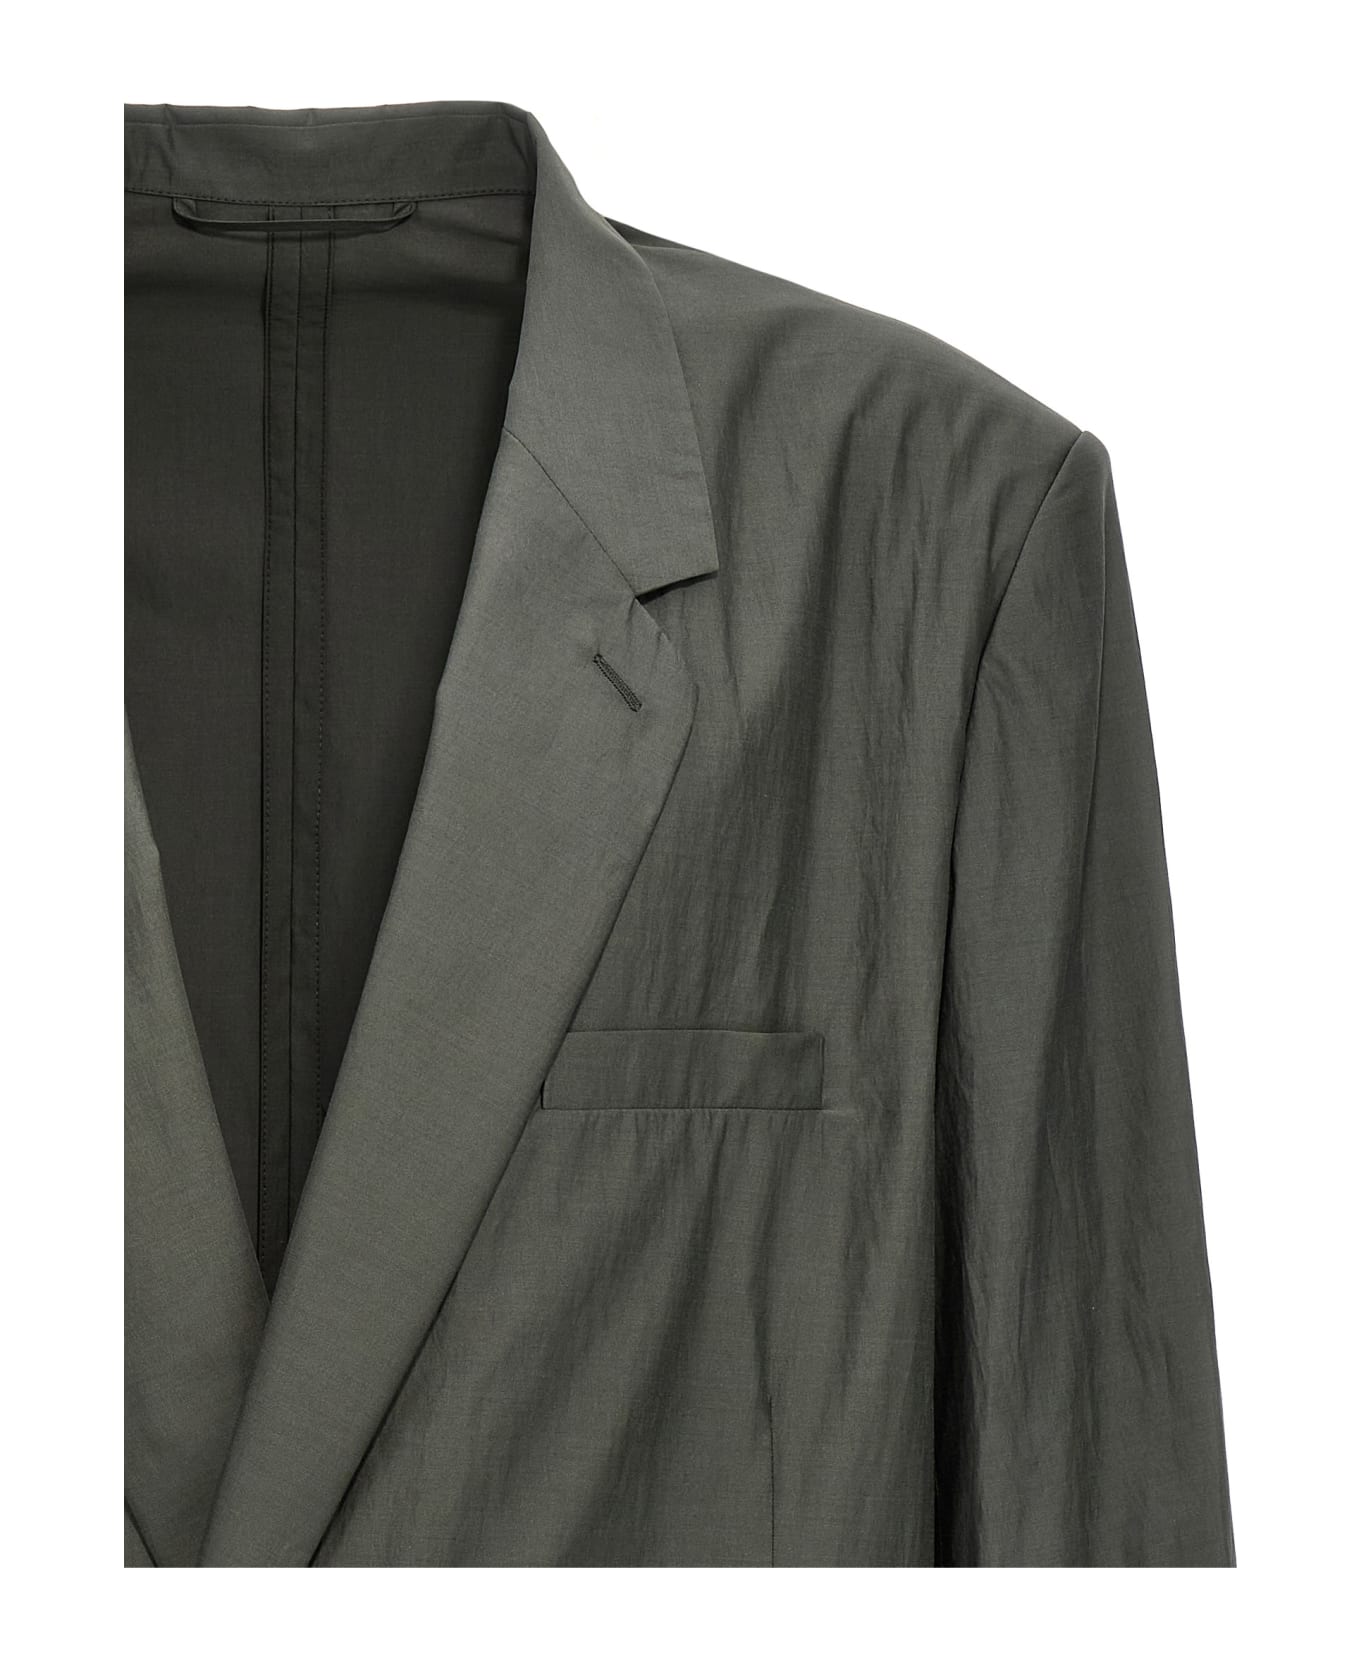 Lemaire Double-breasted Jacket - Gray